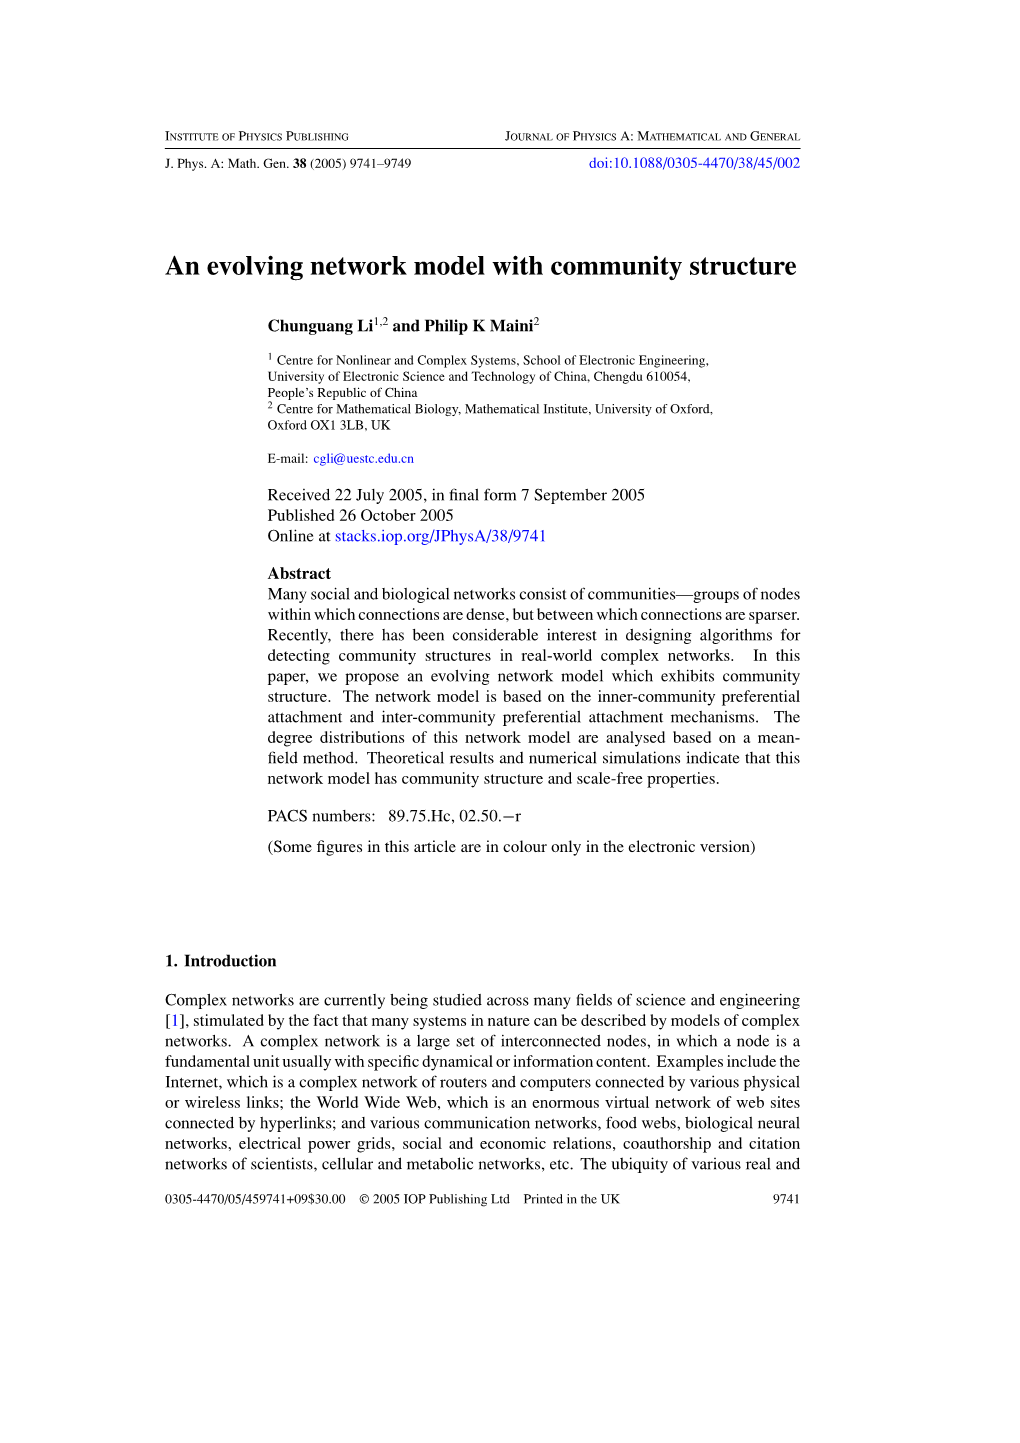 An Evolving Network Model with Community Structure